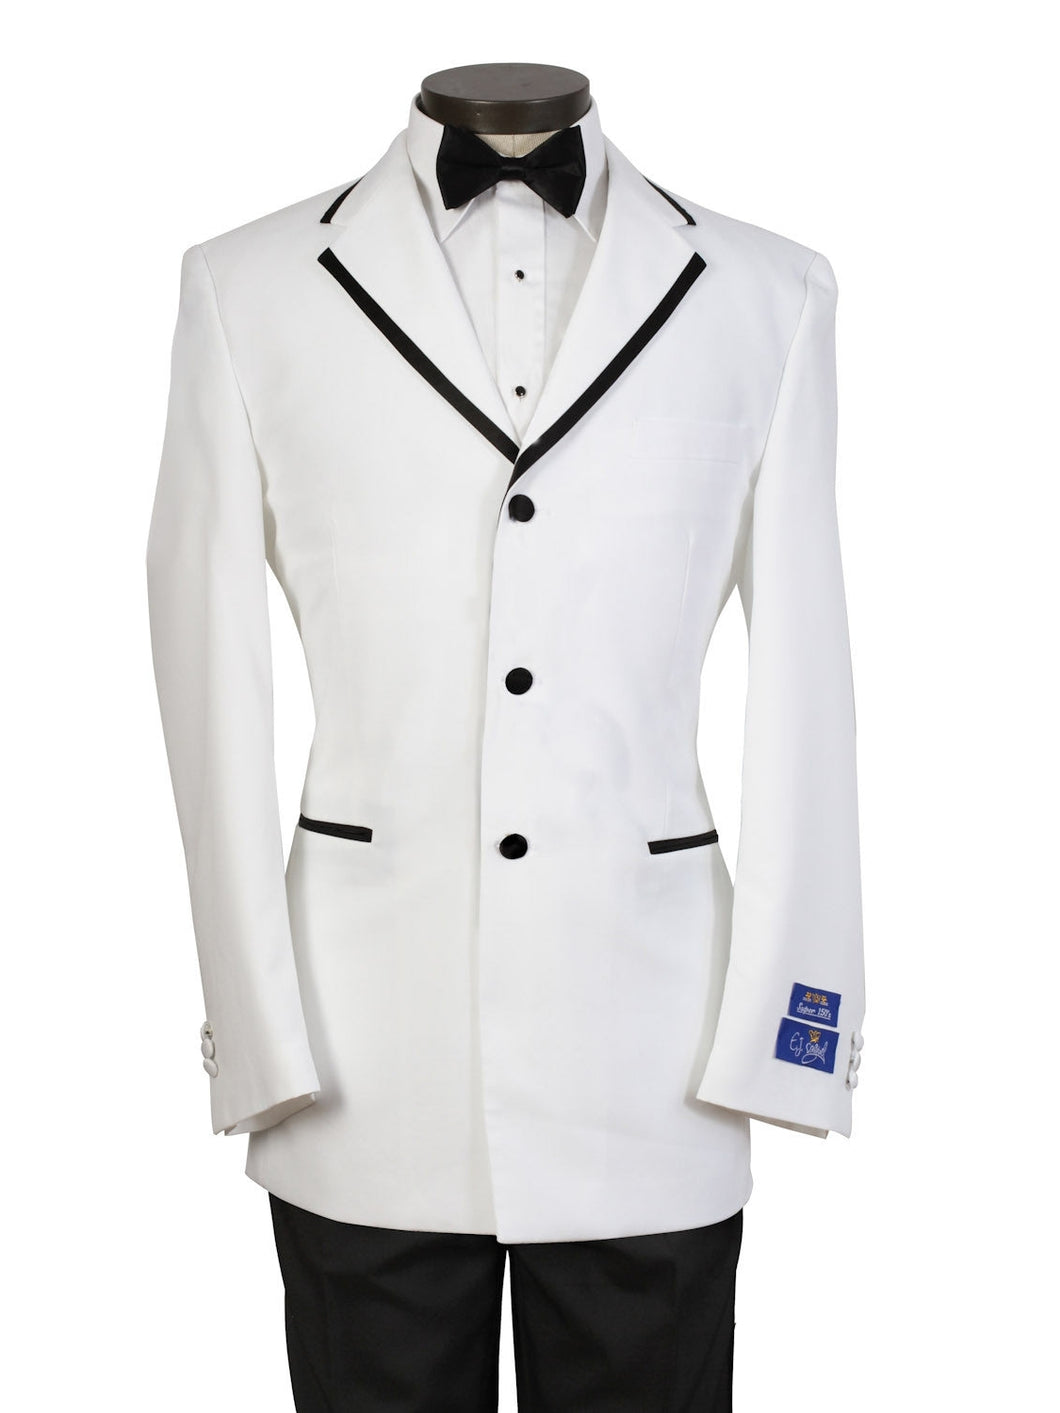 Mens White Tuxedo with Black Frame Lapel - Includes Pants! - SUPER SALE PRICE - Limited Sizes